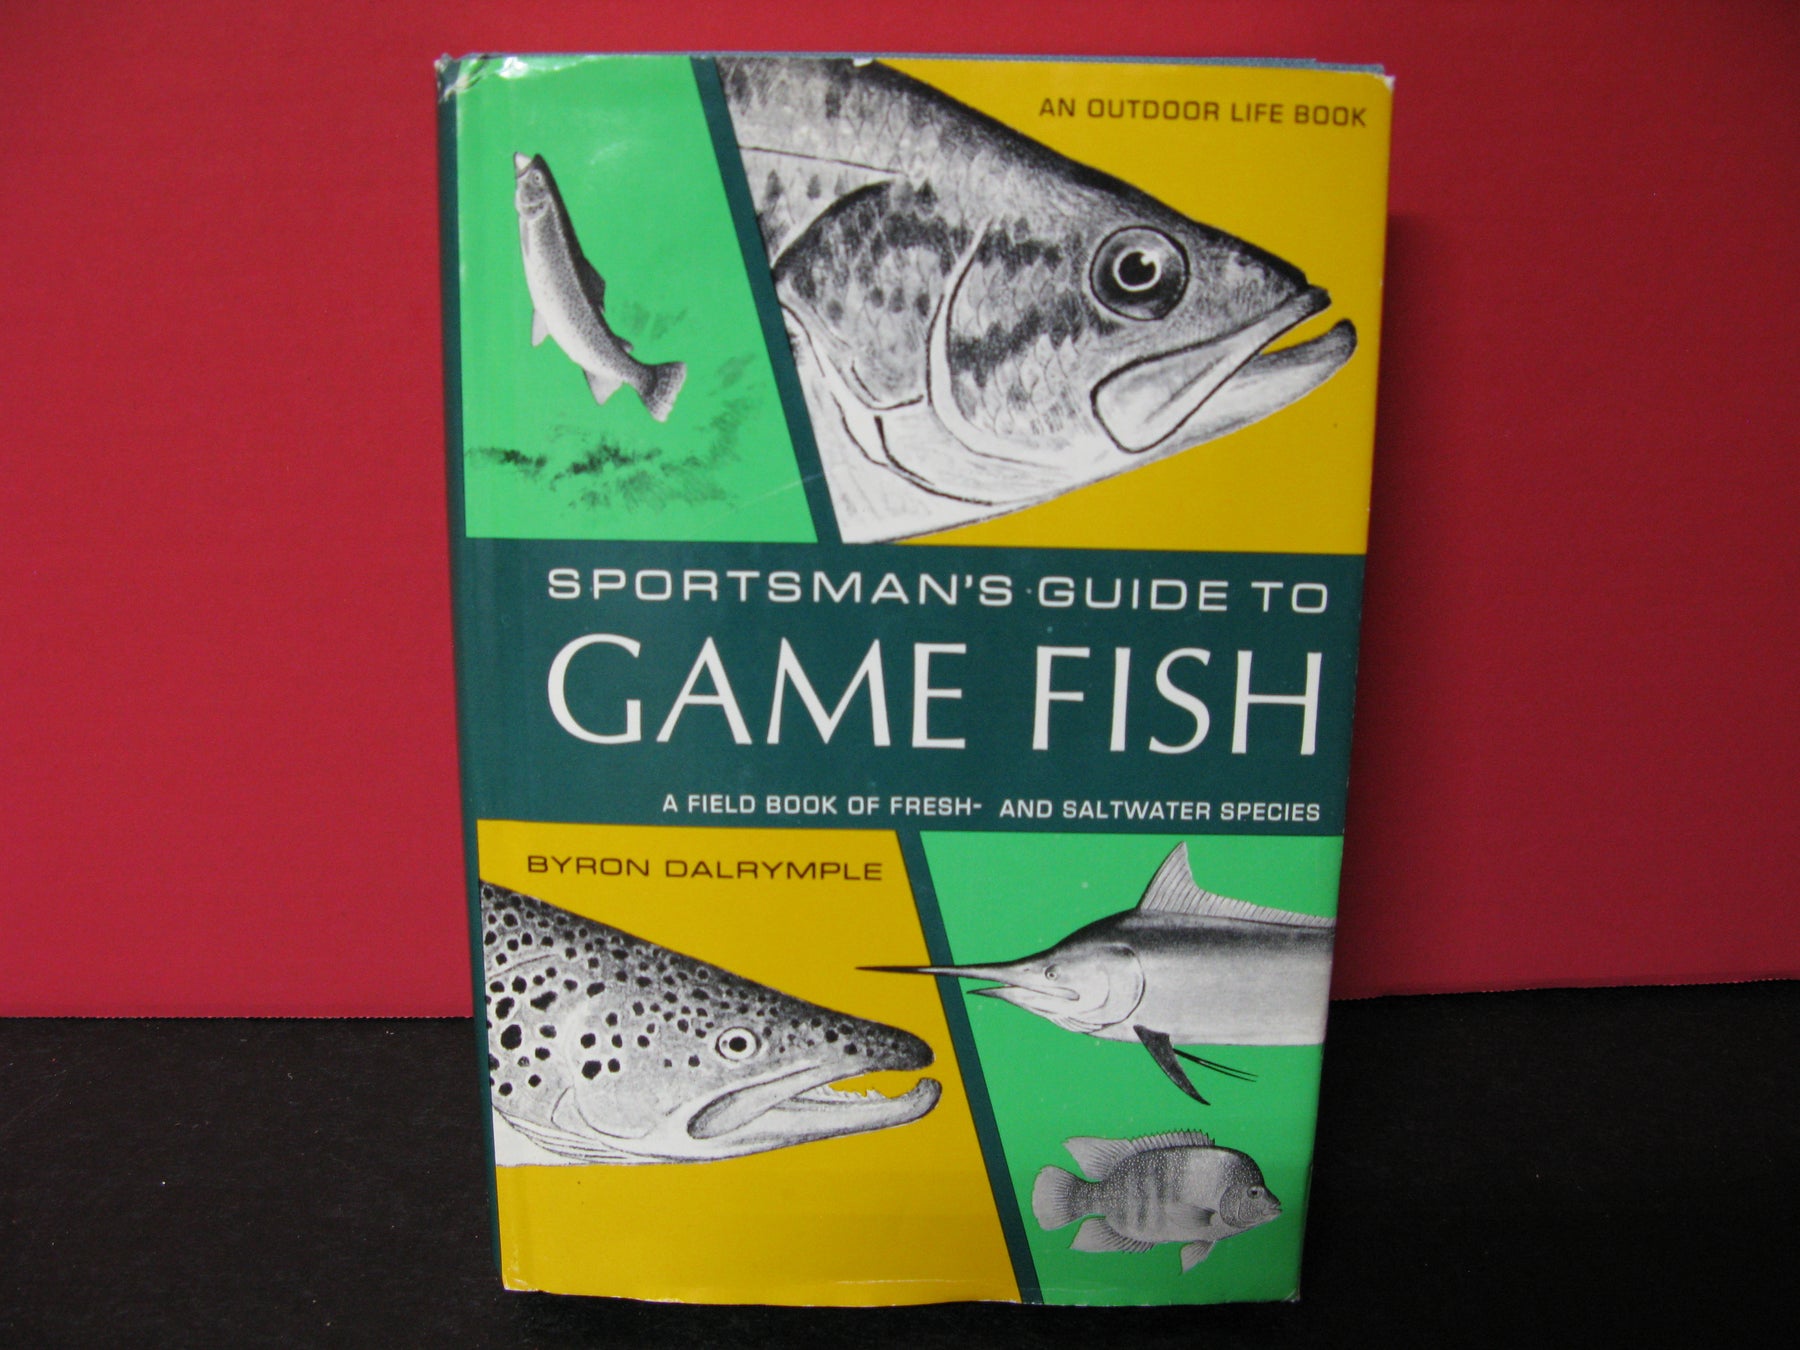 Sportsman's Guide to Game Fish